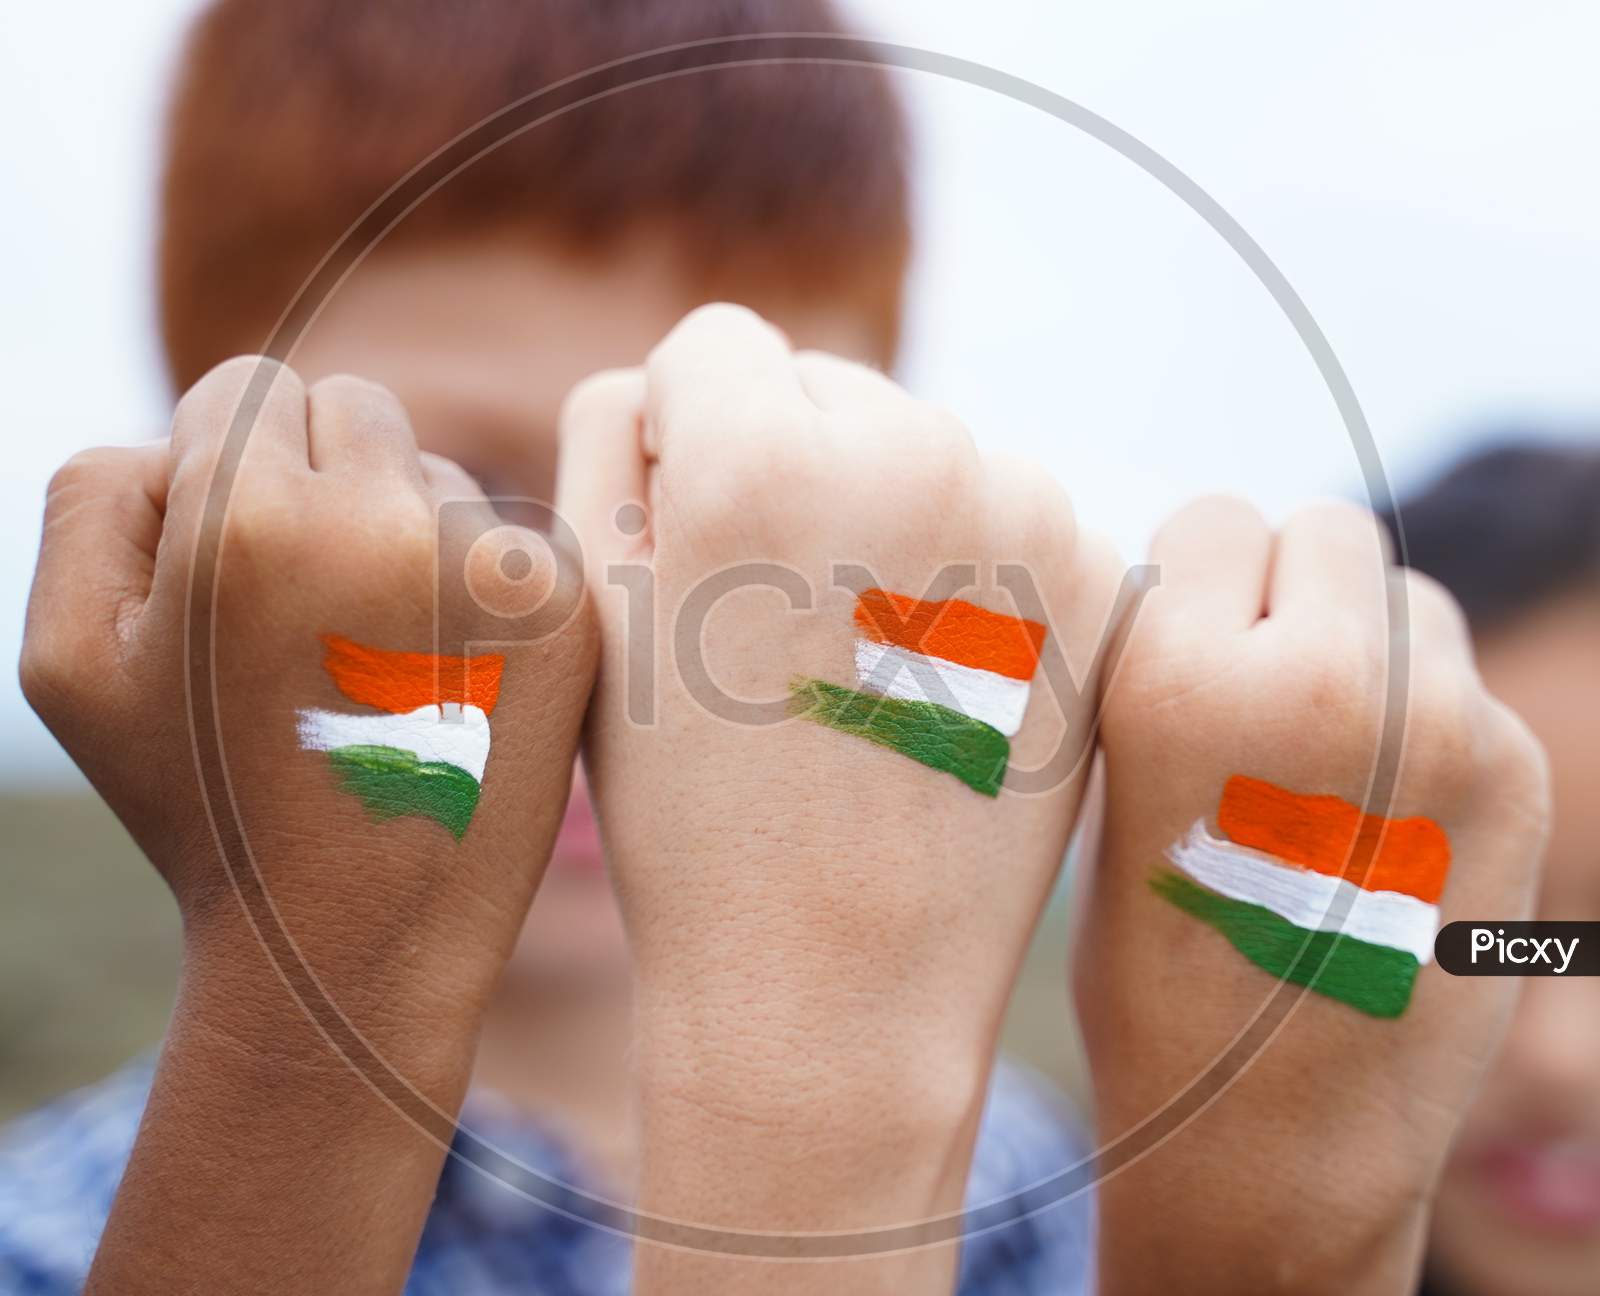 Kids Fist Hands Painted With Indian Falg During Independence Day Or Republic Day Celebration - Concept Showing Of Solidarity, Raised Fist Of A Protesters Or Patriotism